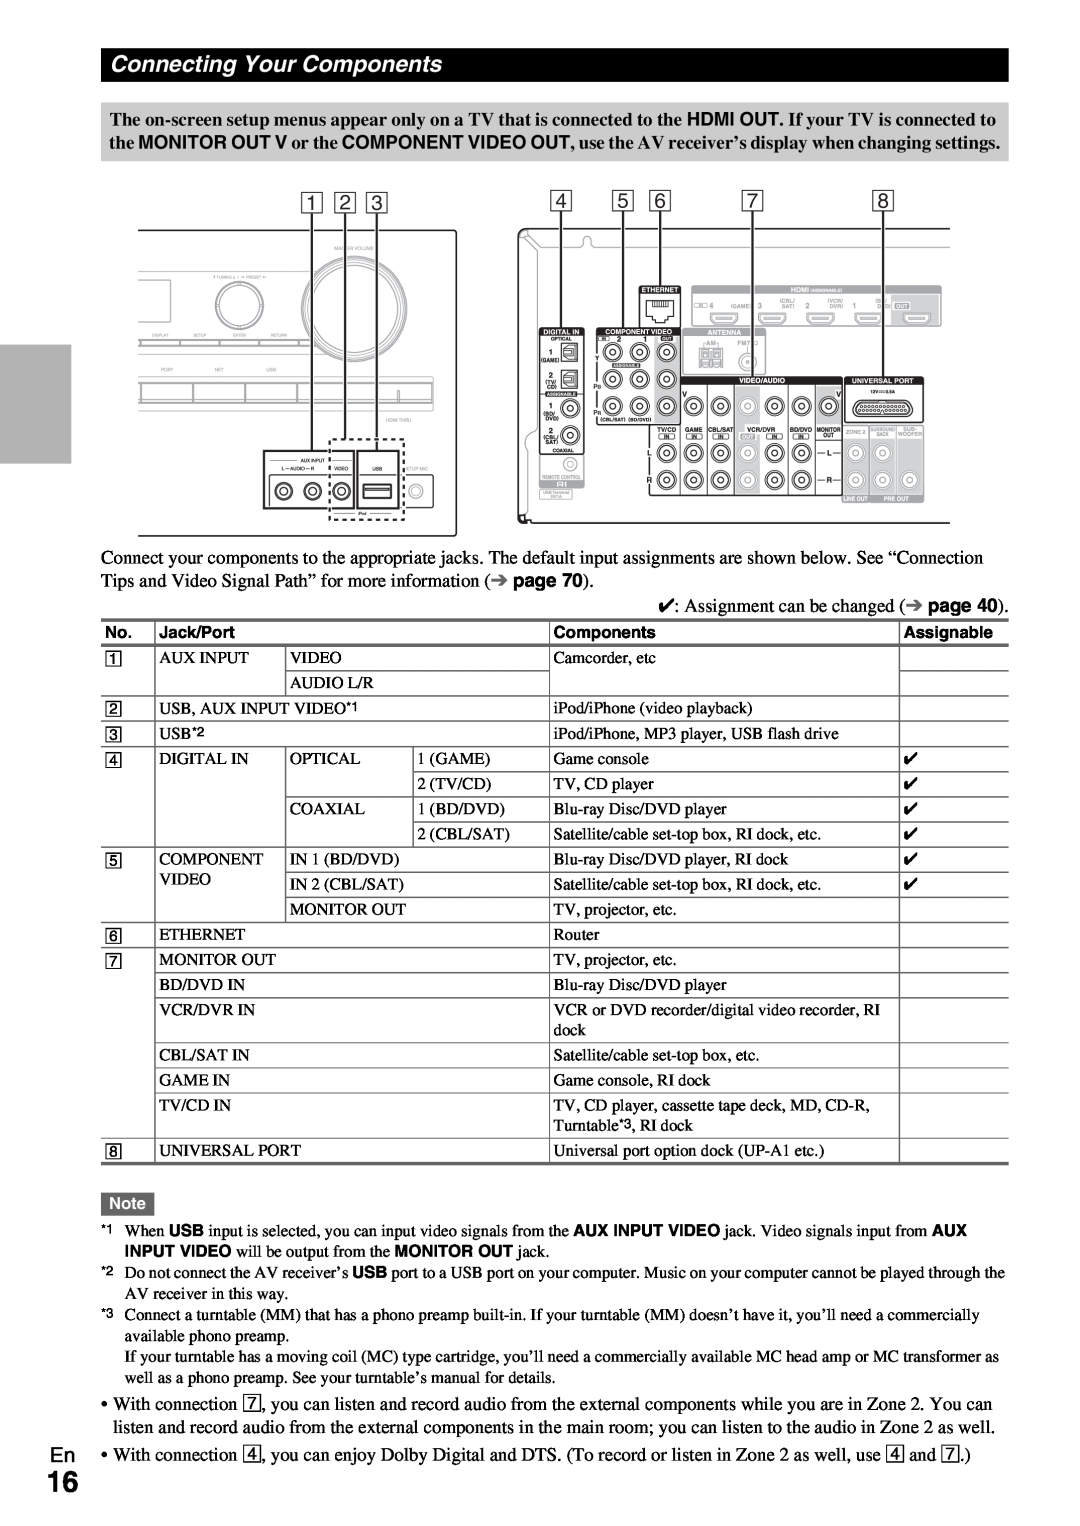 Onkyo TX-NR509 instruction manual Connecting Your Components, A B C D E F G H 